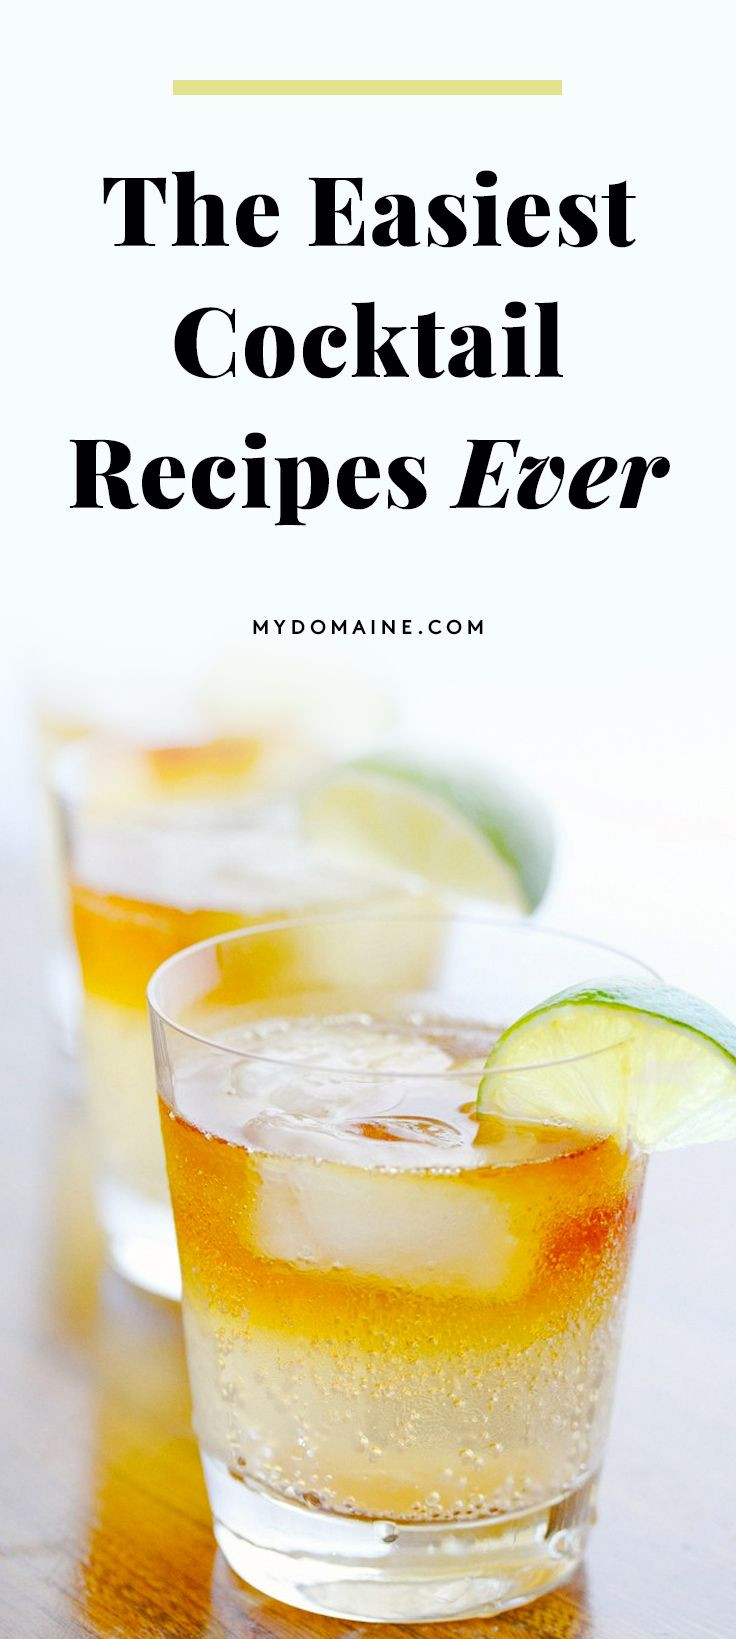 Easy Summer Vodka Drinks
 25 best ideas about Simple Mixed Drinks on Pinterest